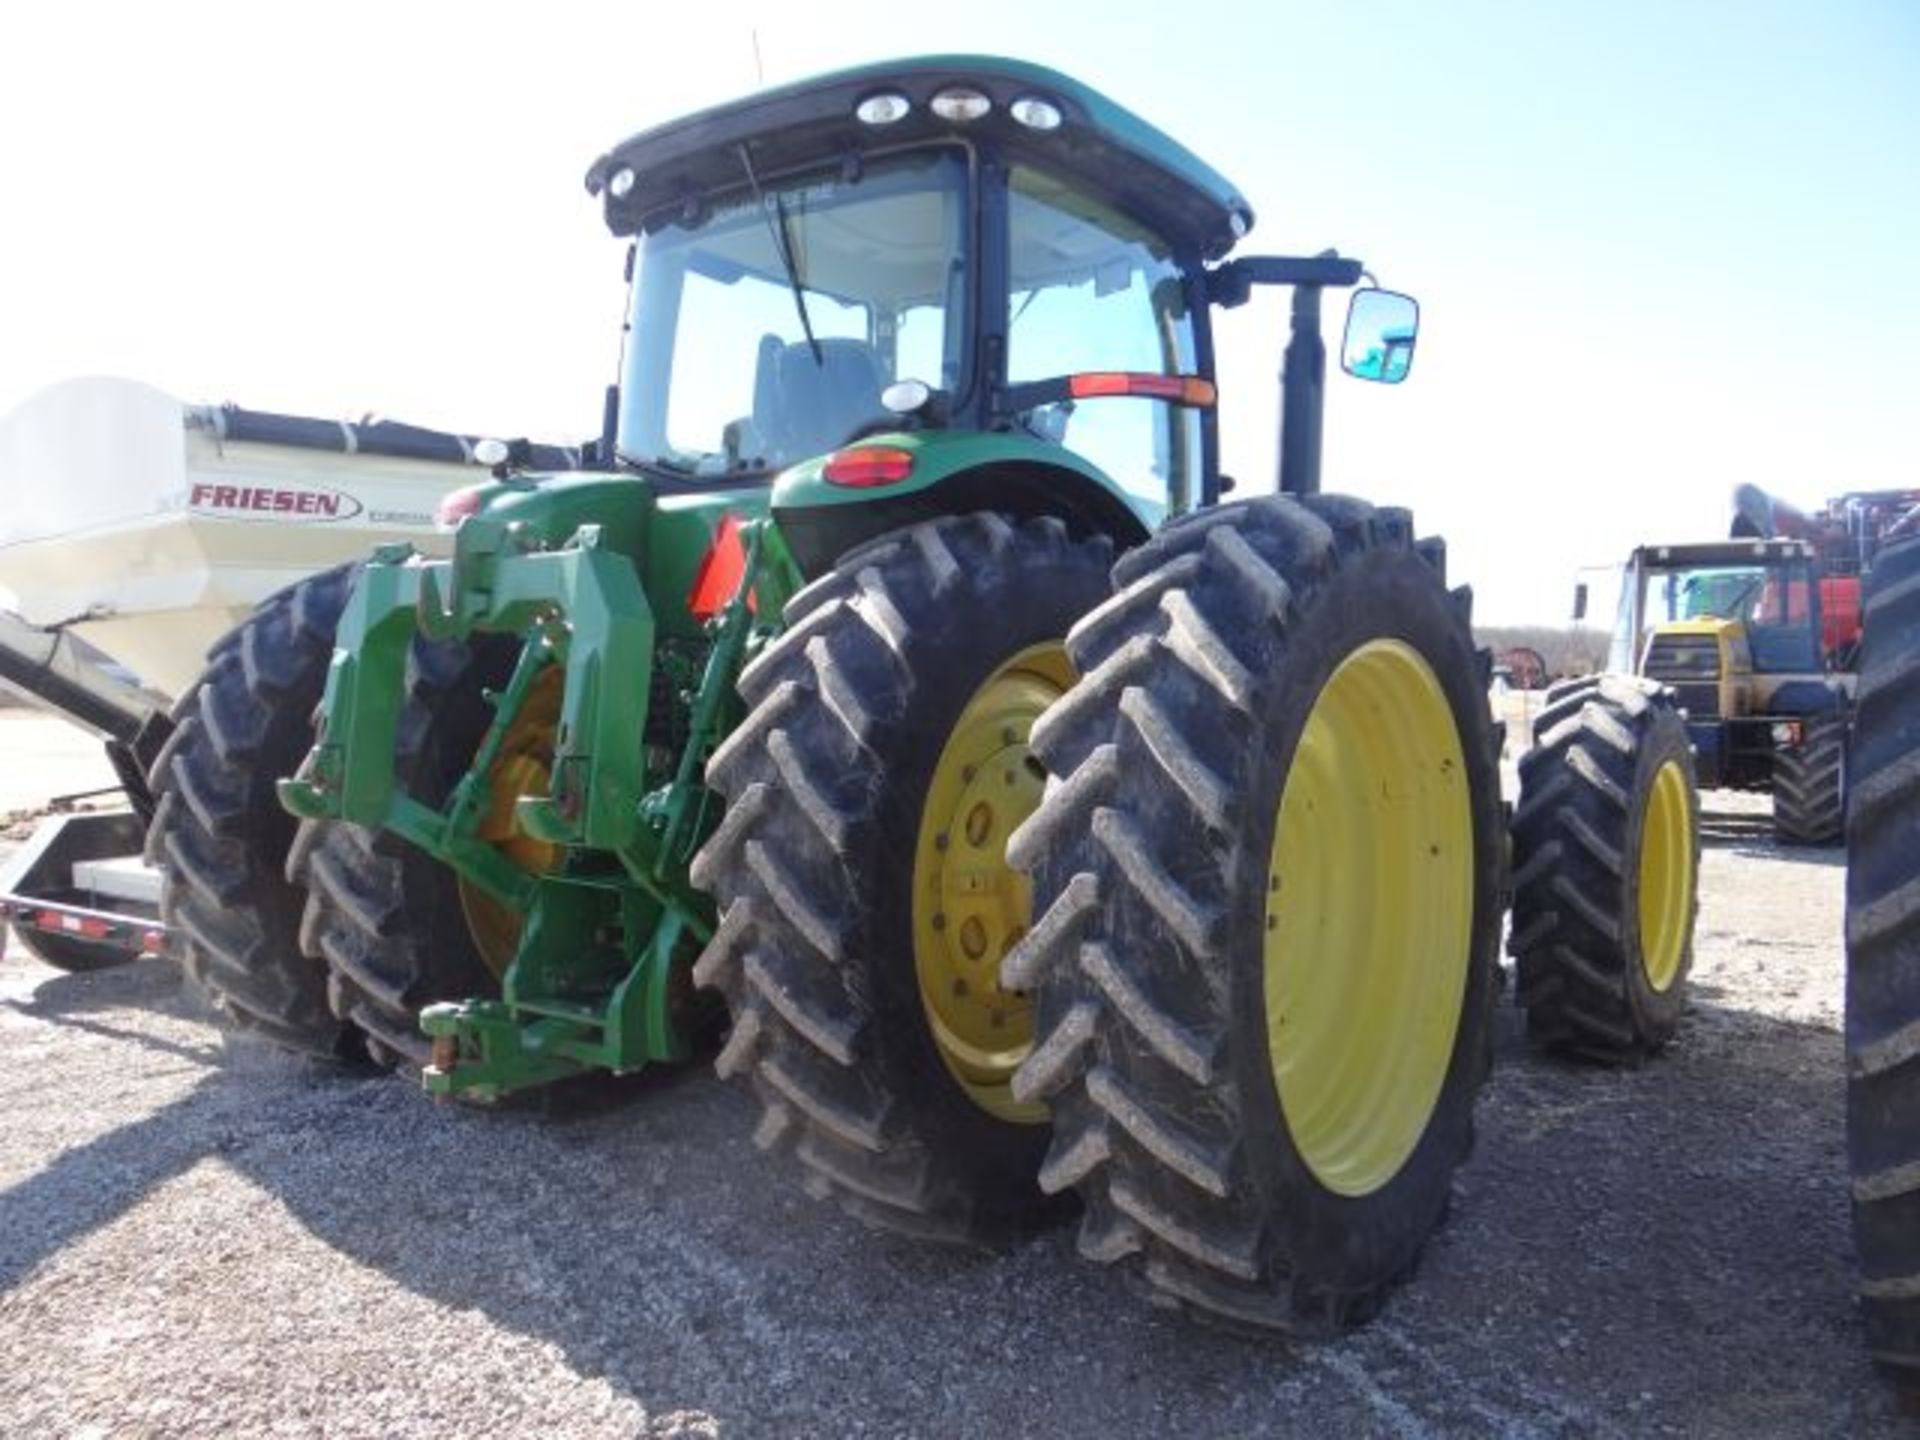 JD 8360R Tractor, 2012 50", Rear Tires, Front Duals, 4 Remotes, Auto Trac, IVT, ILS, Wts, 5244 hrs